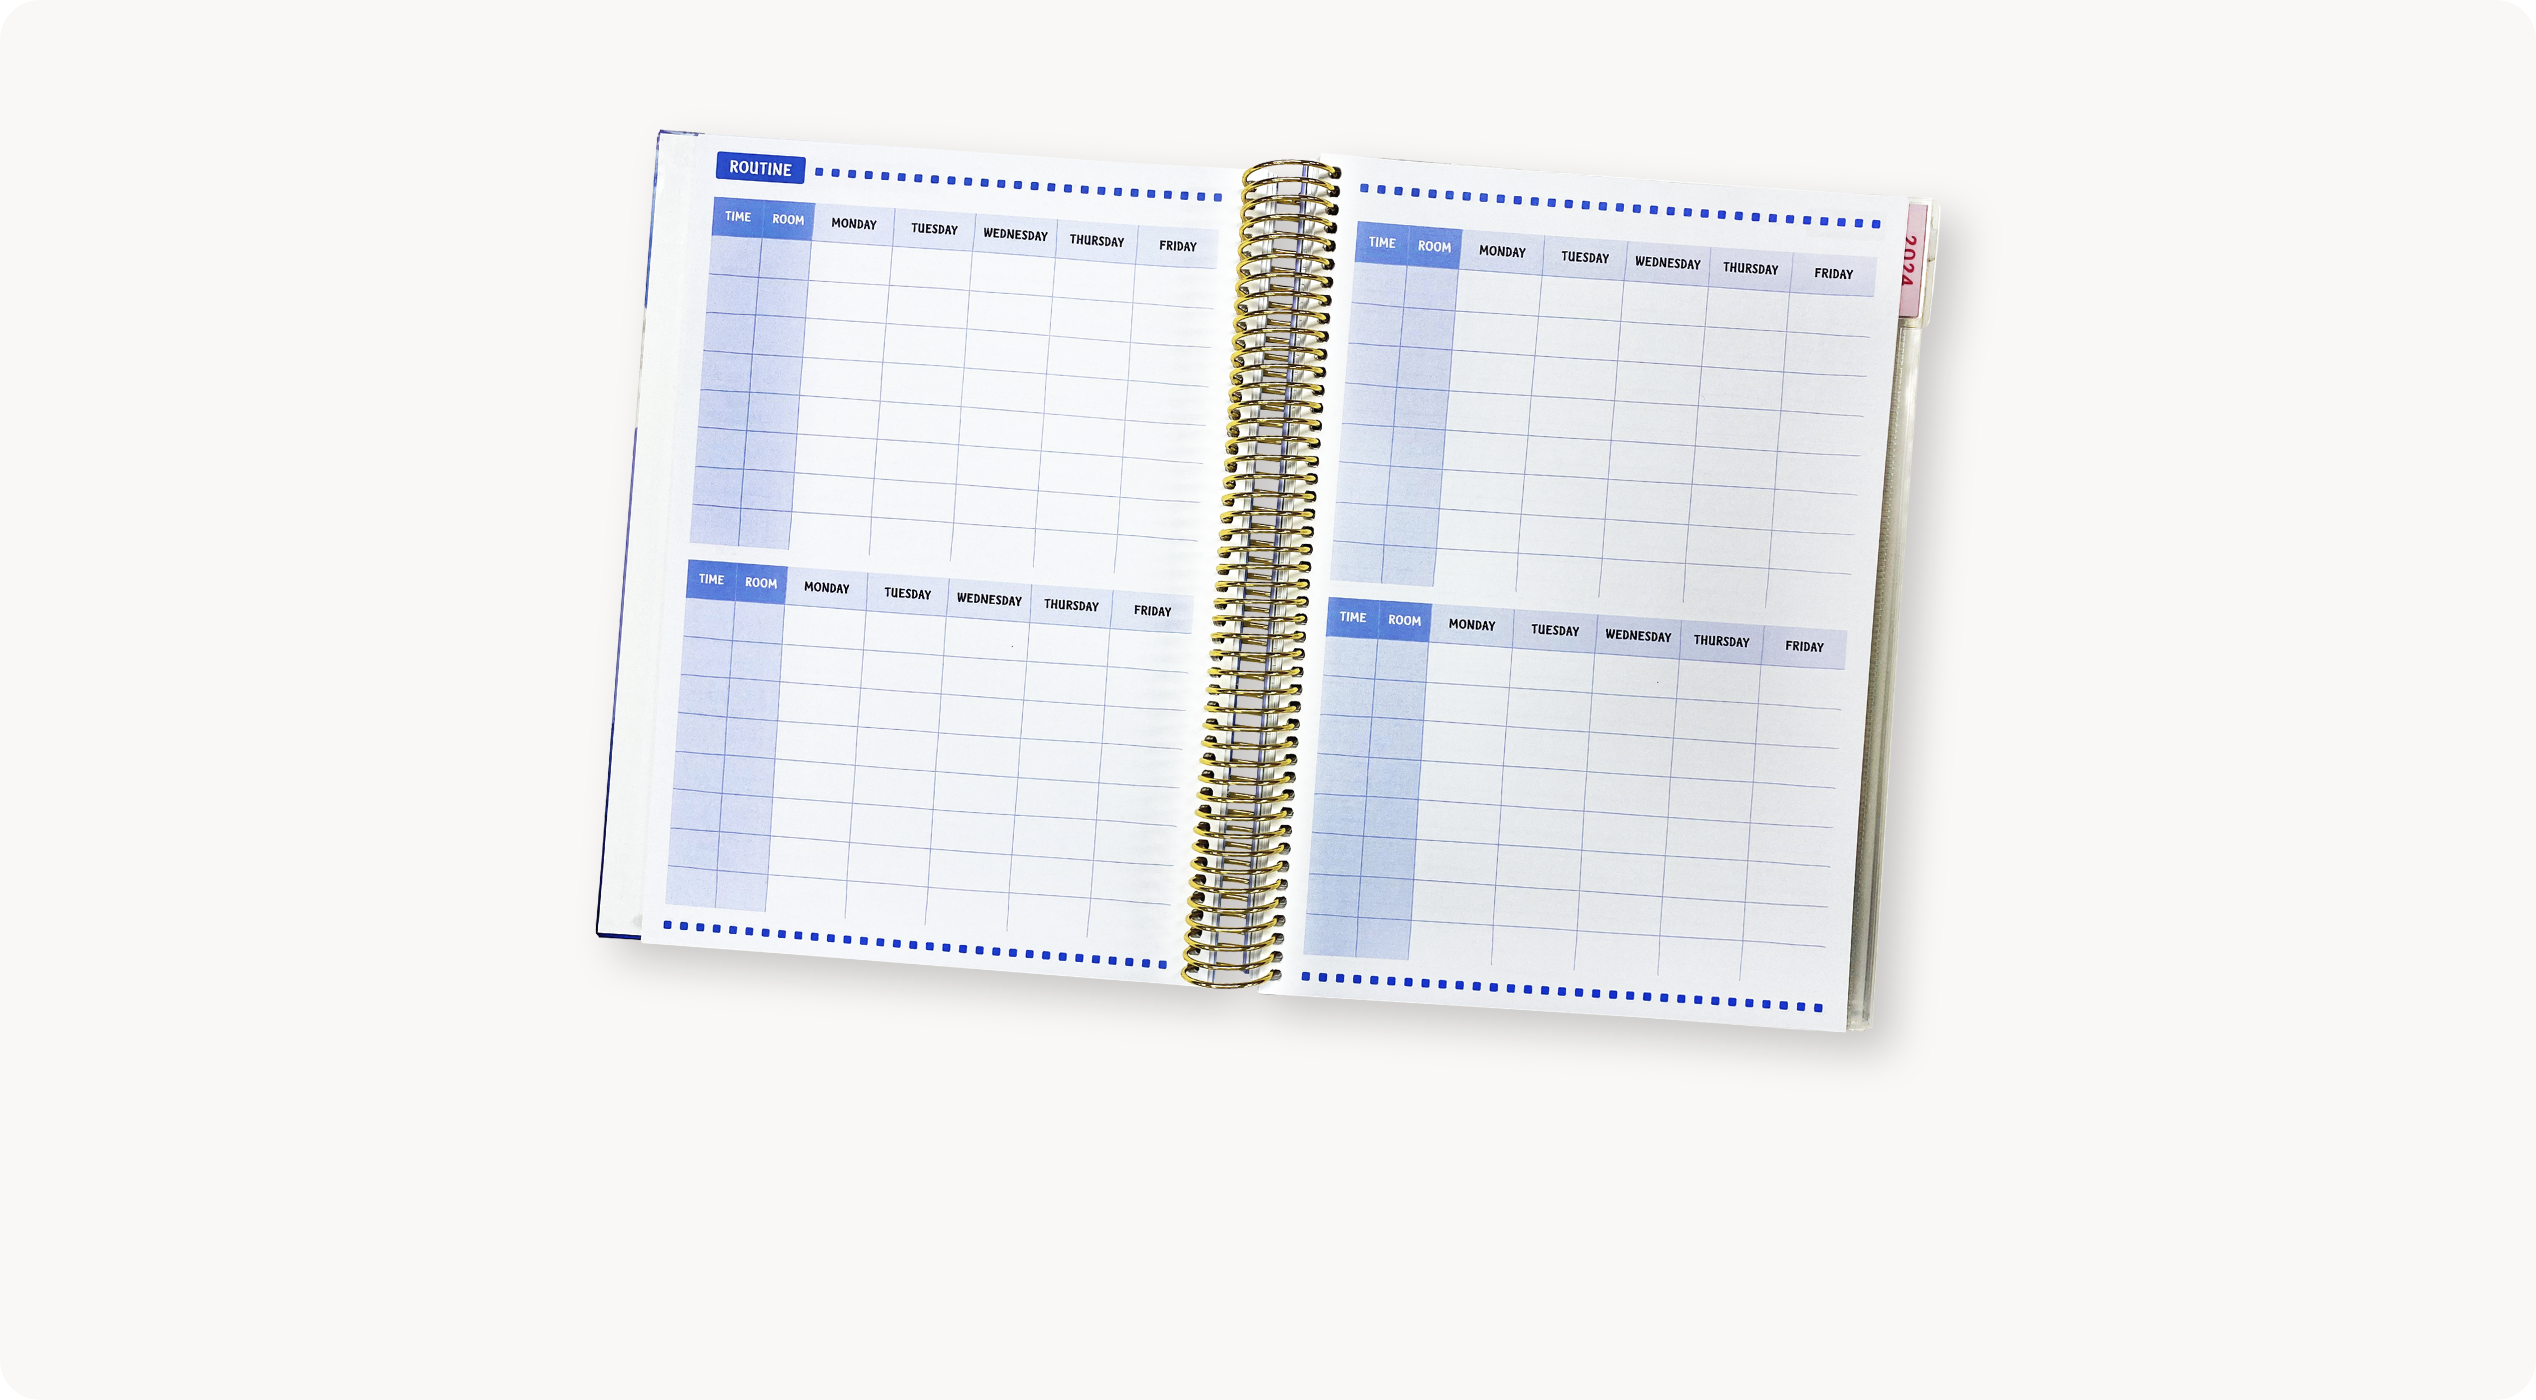 08/10 - Keep track of your rooms and routines in style!